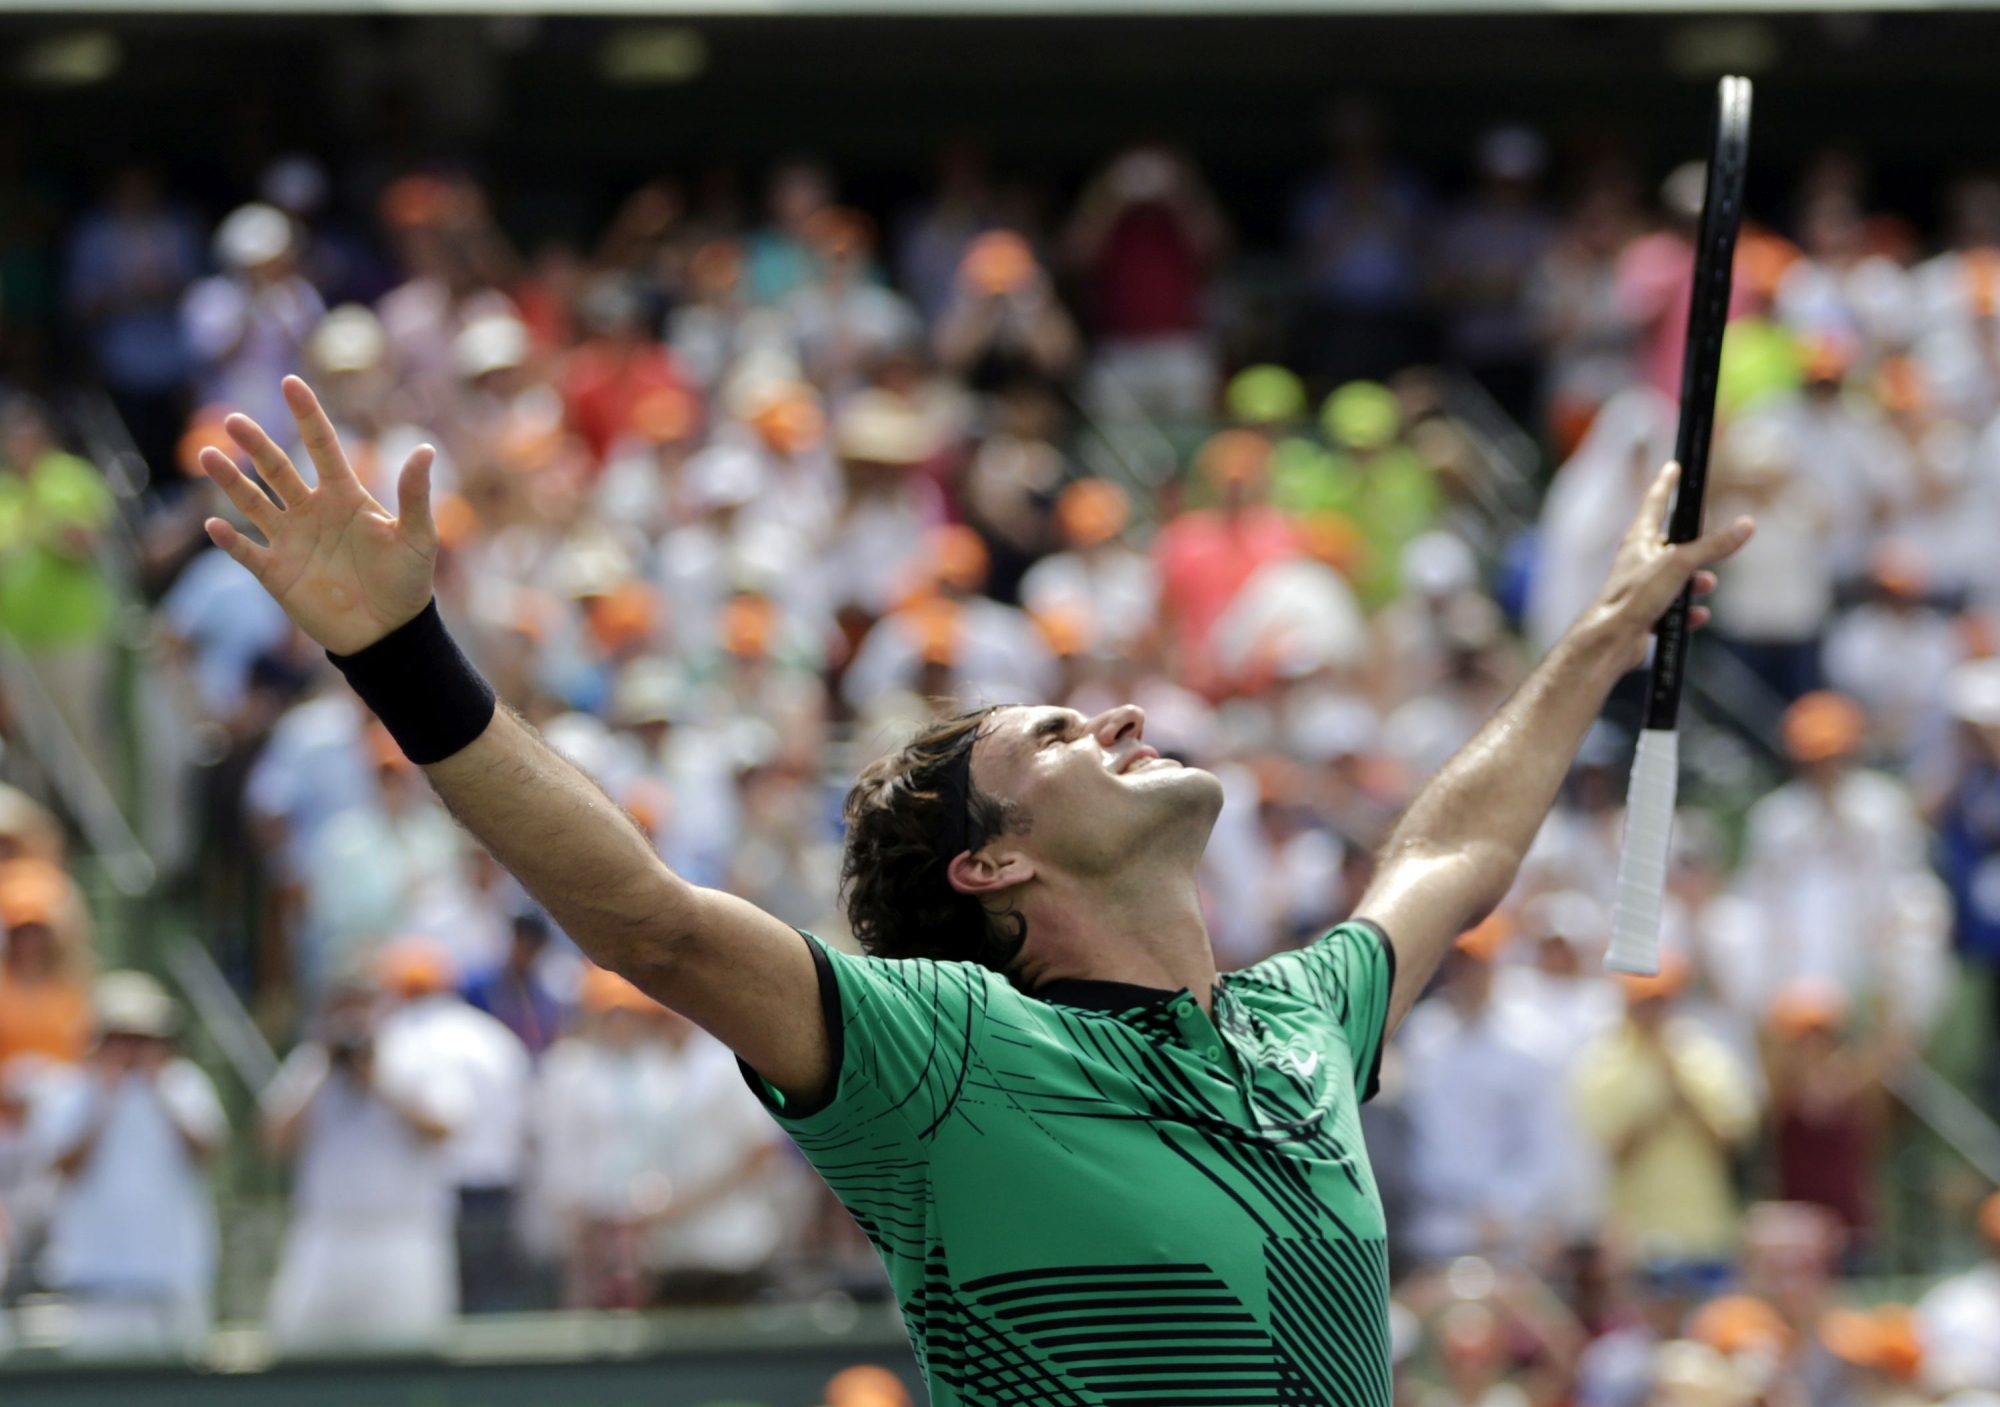 Roger Federer, of Switzerland, celebrates after defeating Rafael Nadal, of Spain, in the men's singles final at the Miami Open tennis tournament, Sunday, April 2, 2017, in Key Biscayne, Fla. (AP Photo/Lynne Sladky)